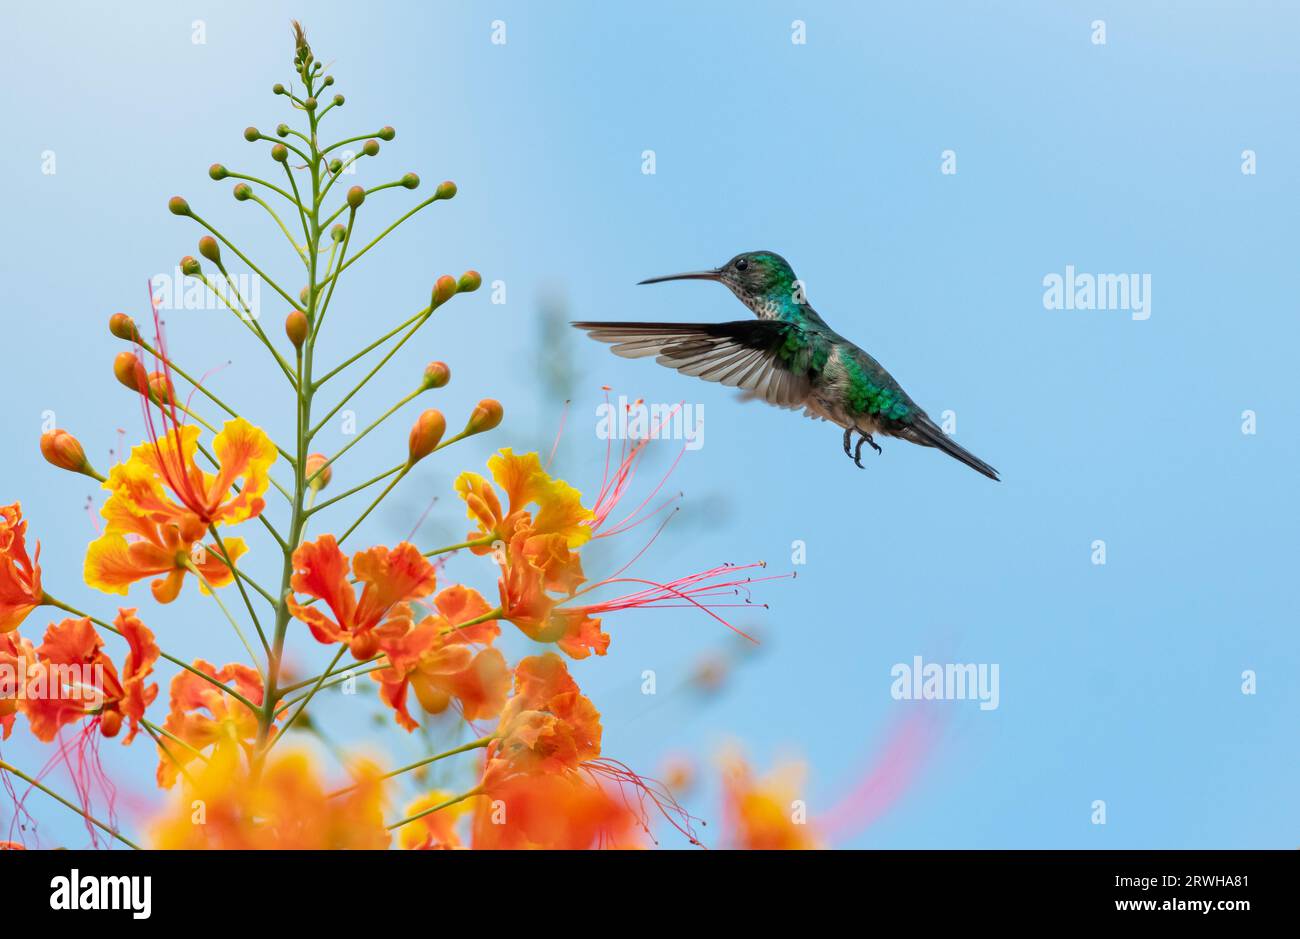 Blue-chinned Sapphire hummingbird, Chlorestes notata, flying next to vibrant orange flowers in the sky Stock Photo